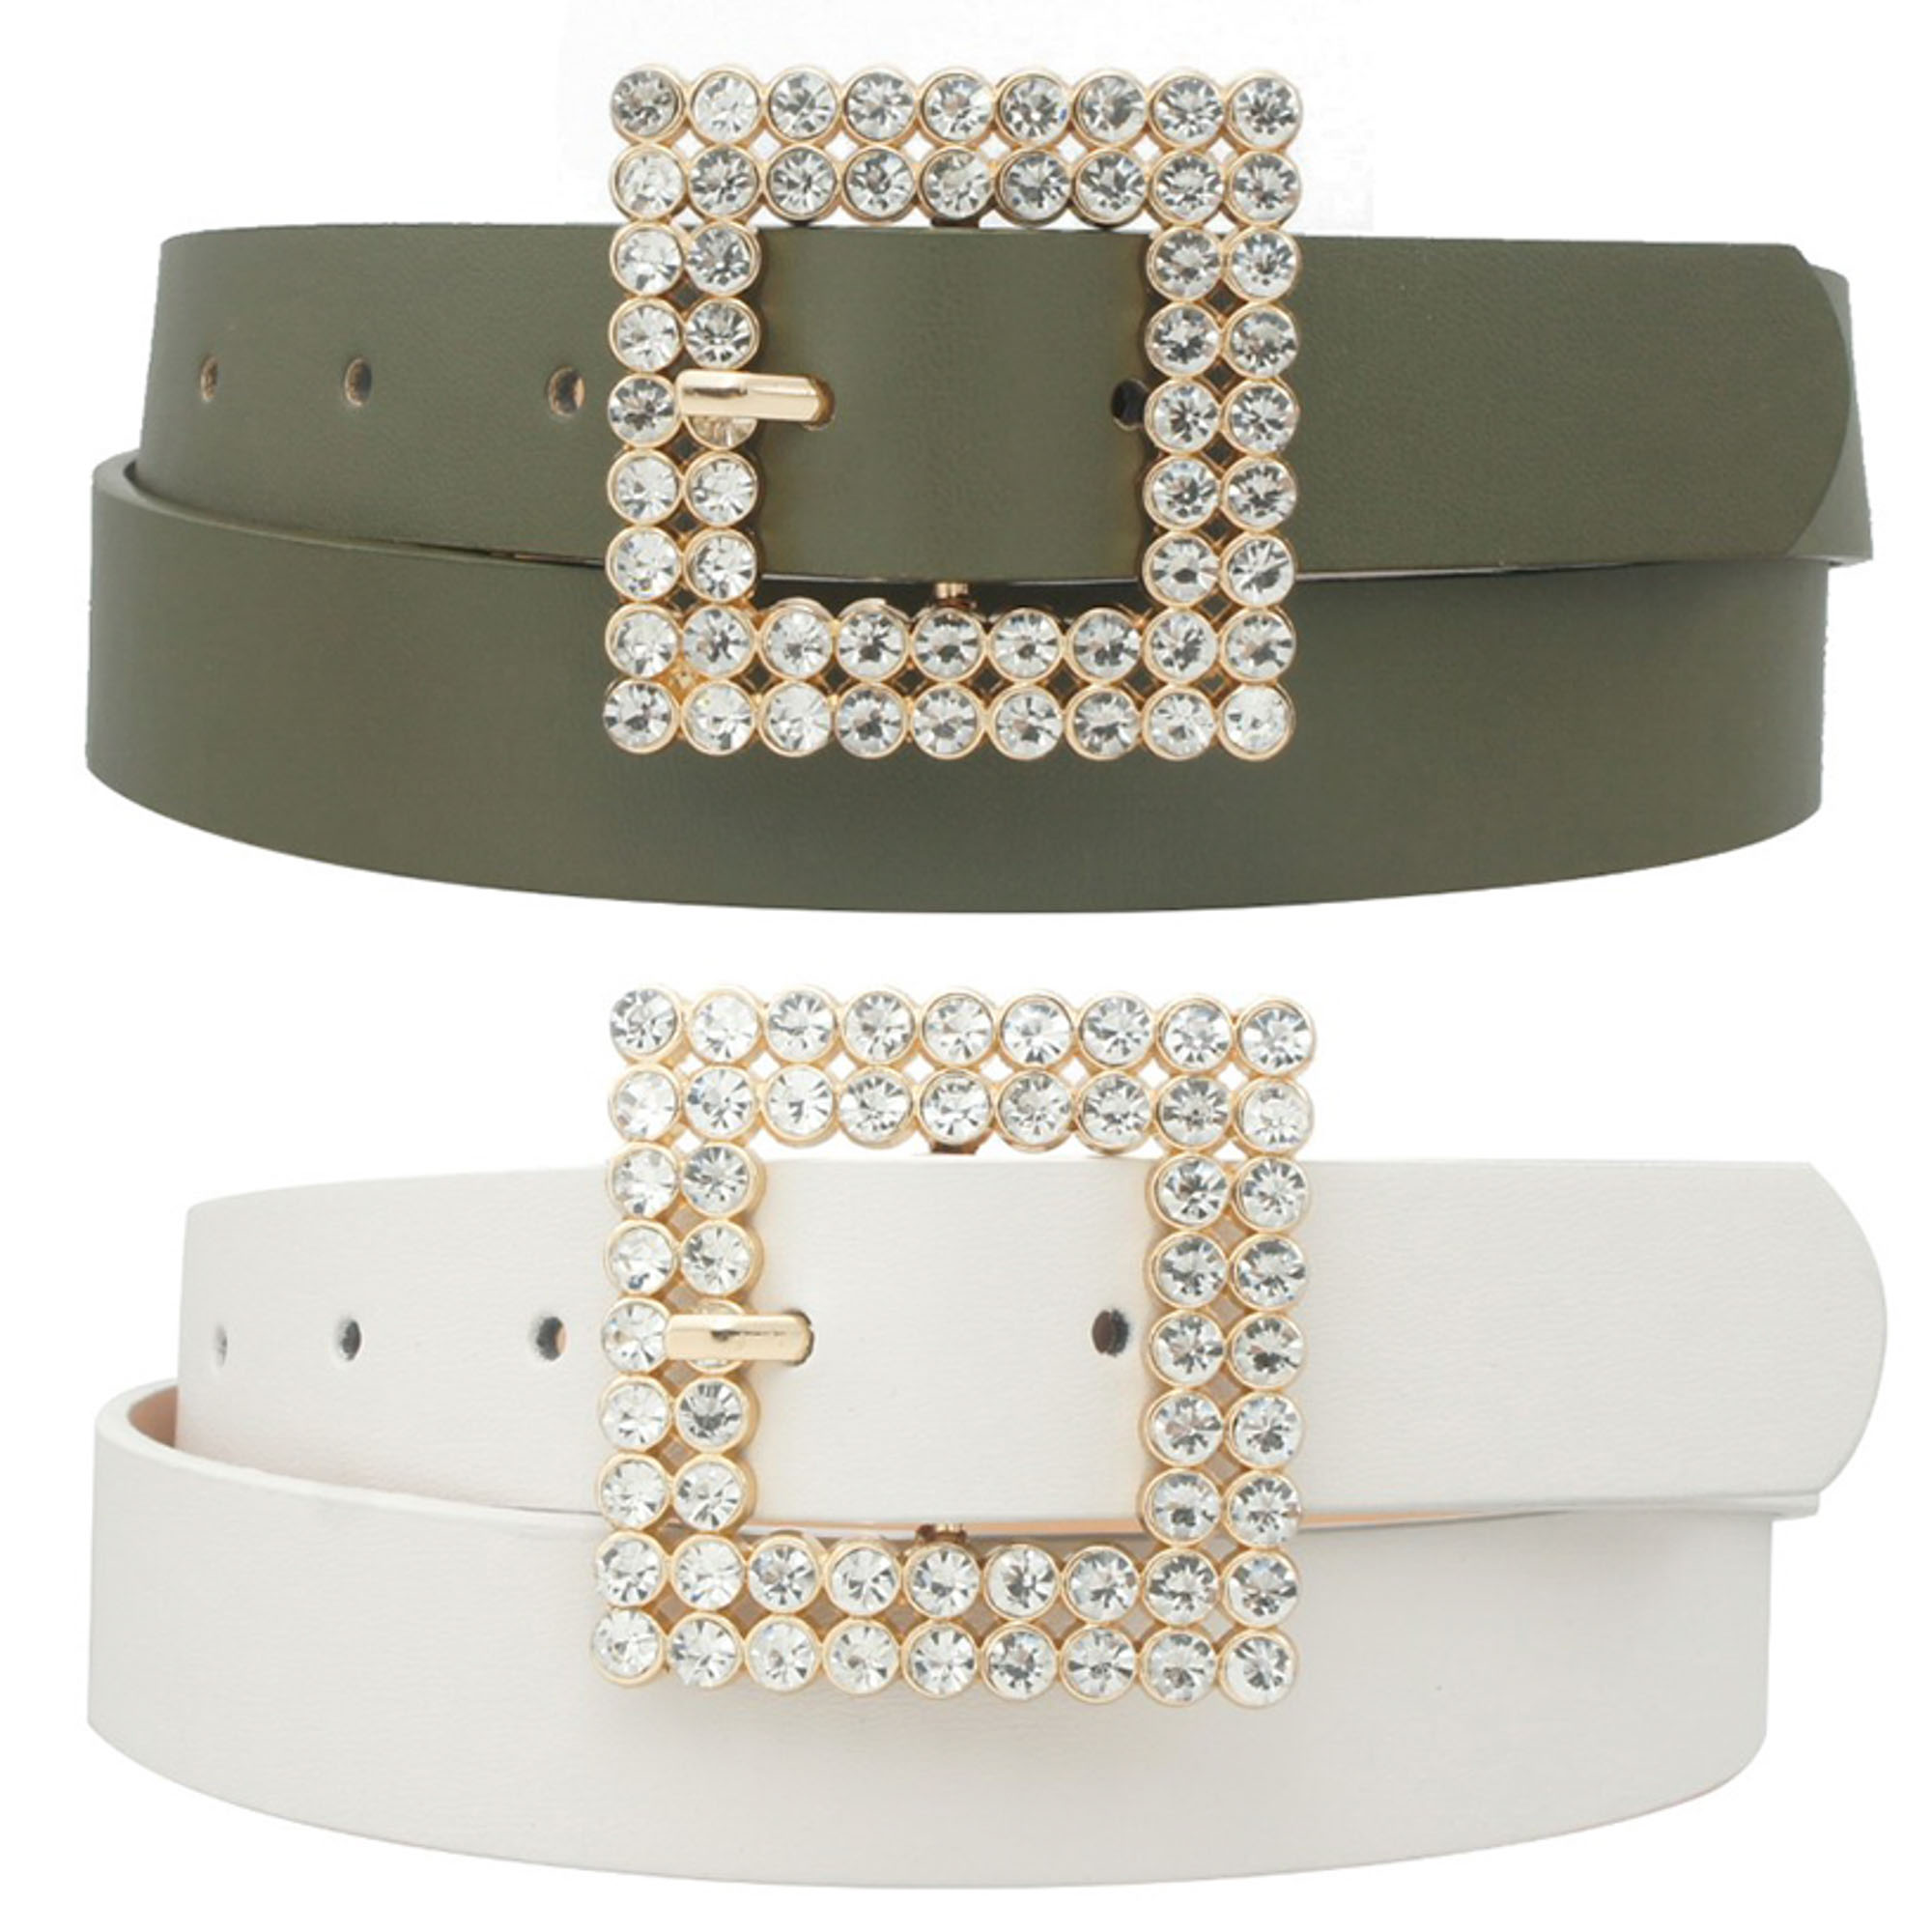 DOUBLE ROW SQUARE BUCKLE DUO BELT